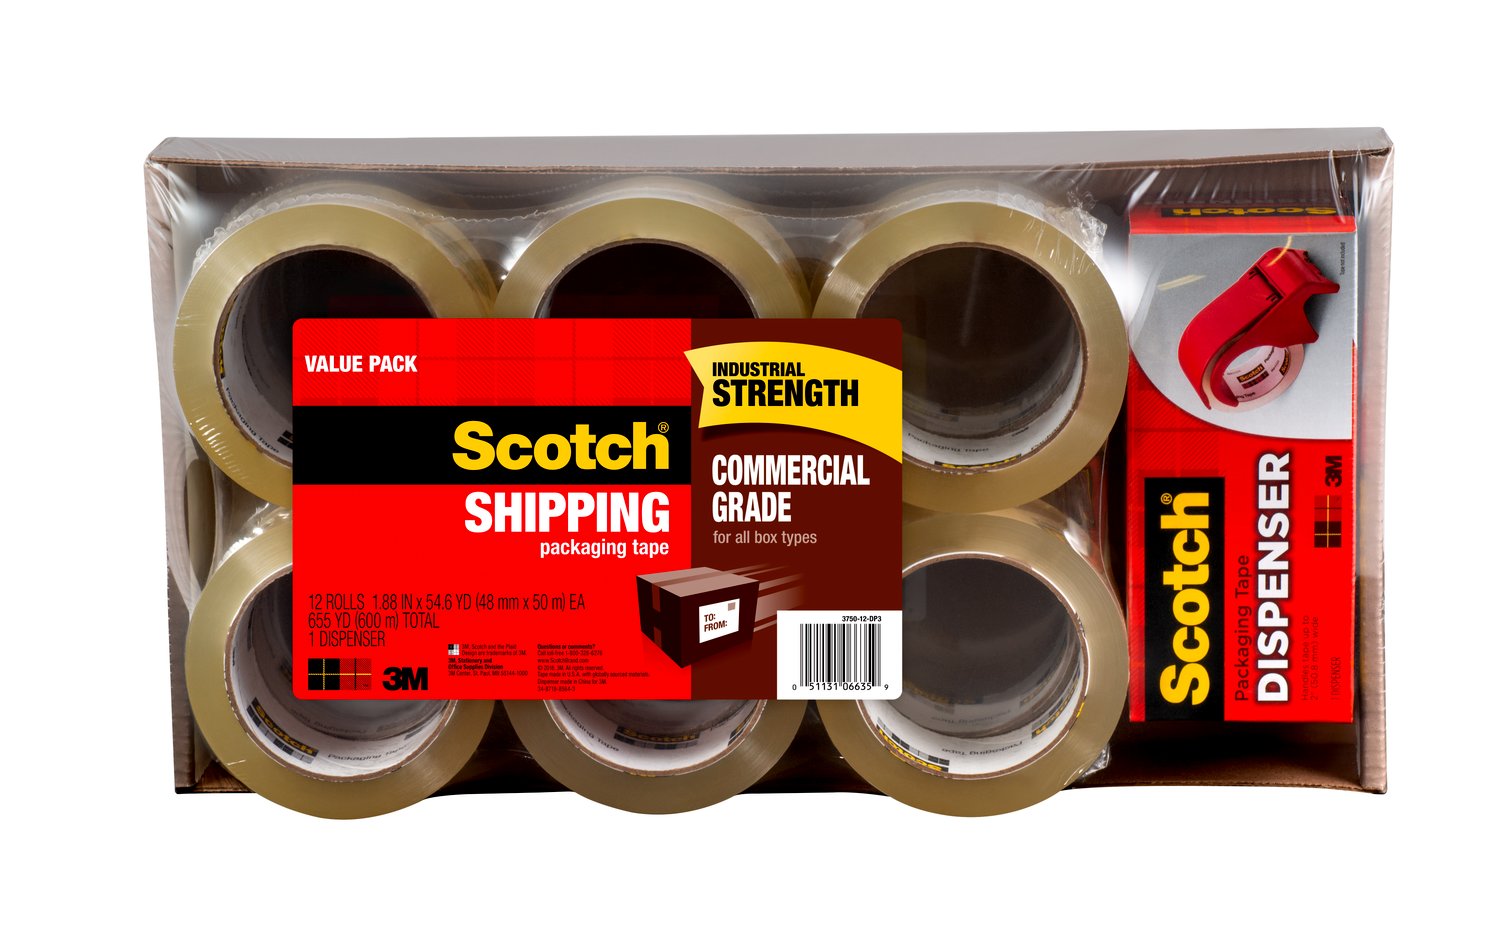 7010369599 - Scotch Commercial Grade Shipping Packaging Tape 3750-12-DP3, 1.88 in x
54.6 yd (48 mm x 50 m) 12 rolls with Dispenser